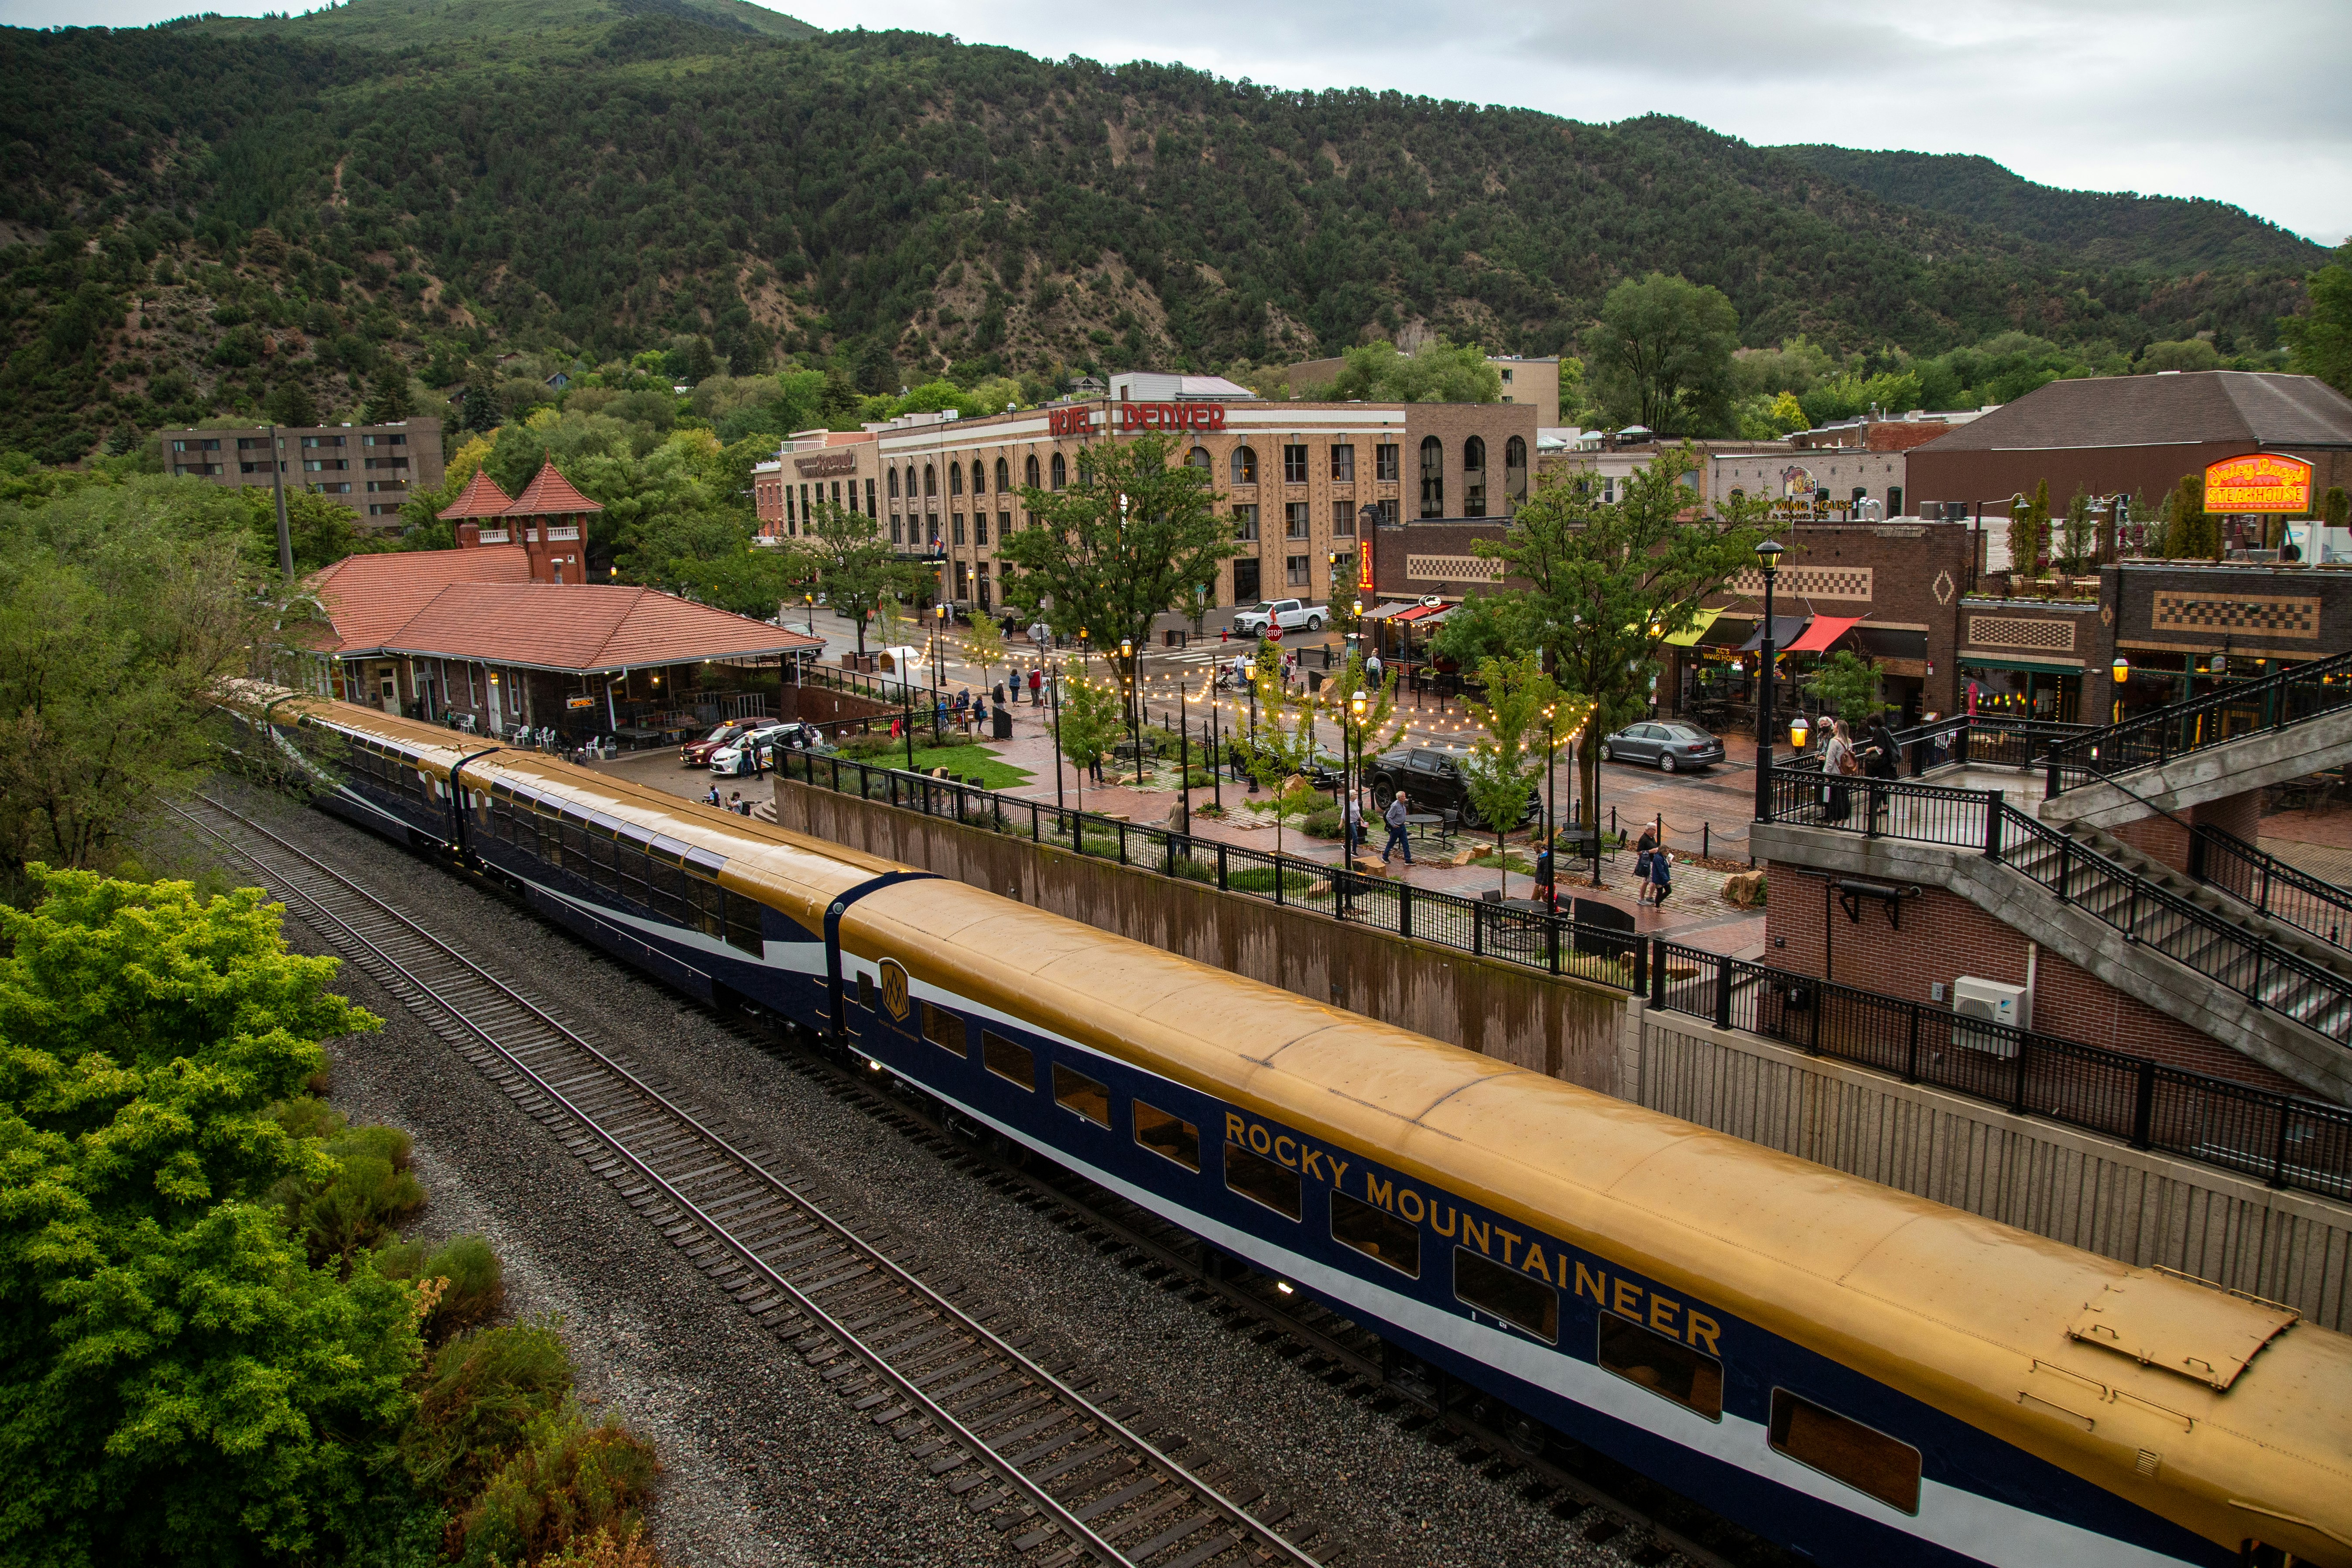 A train stationed in a town surrounded by mountains